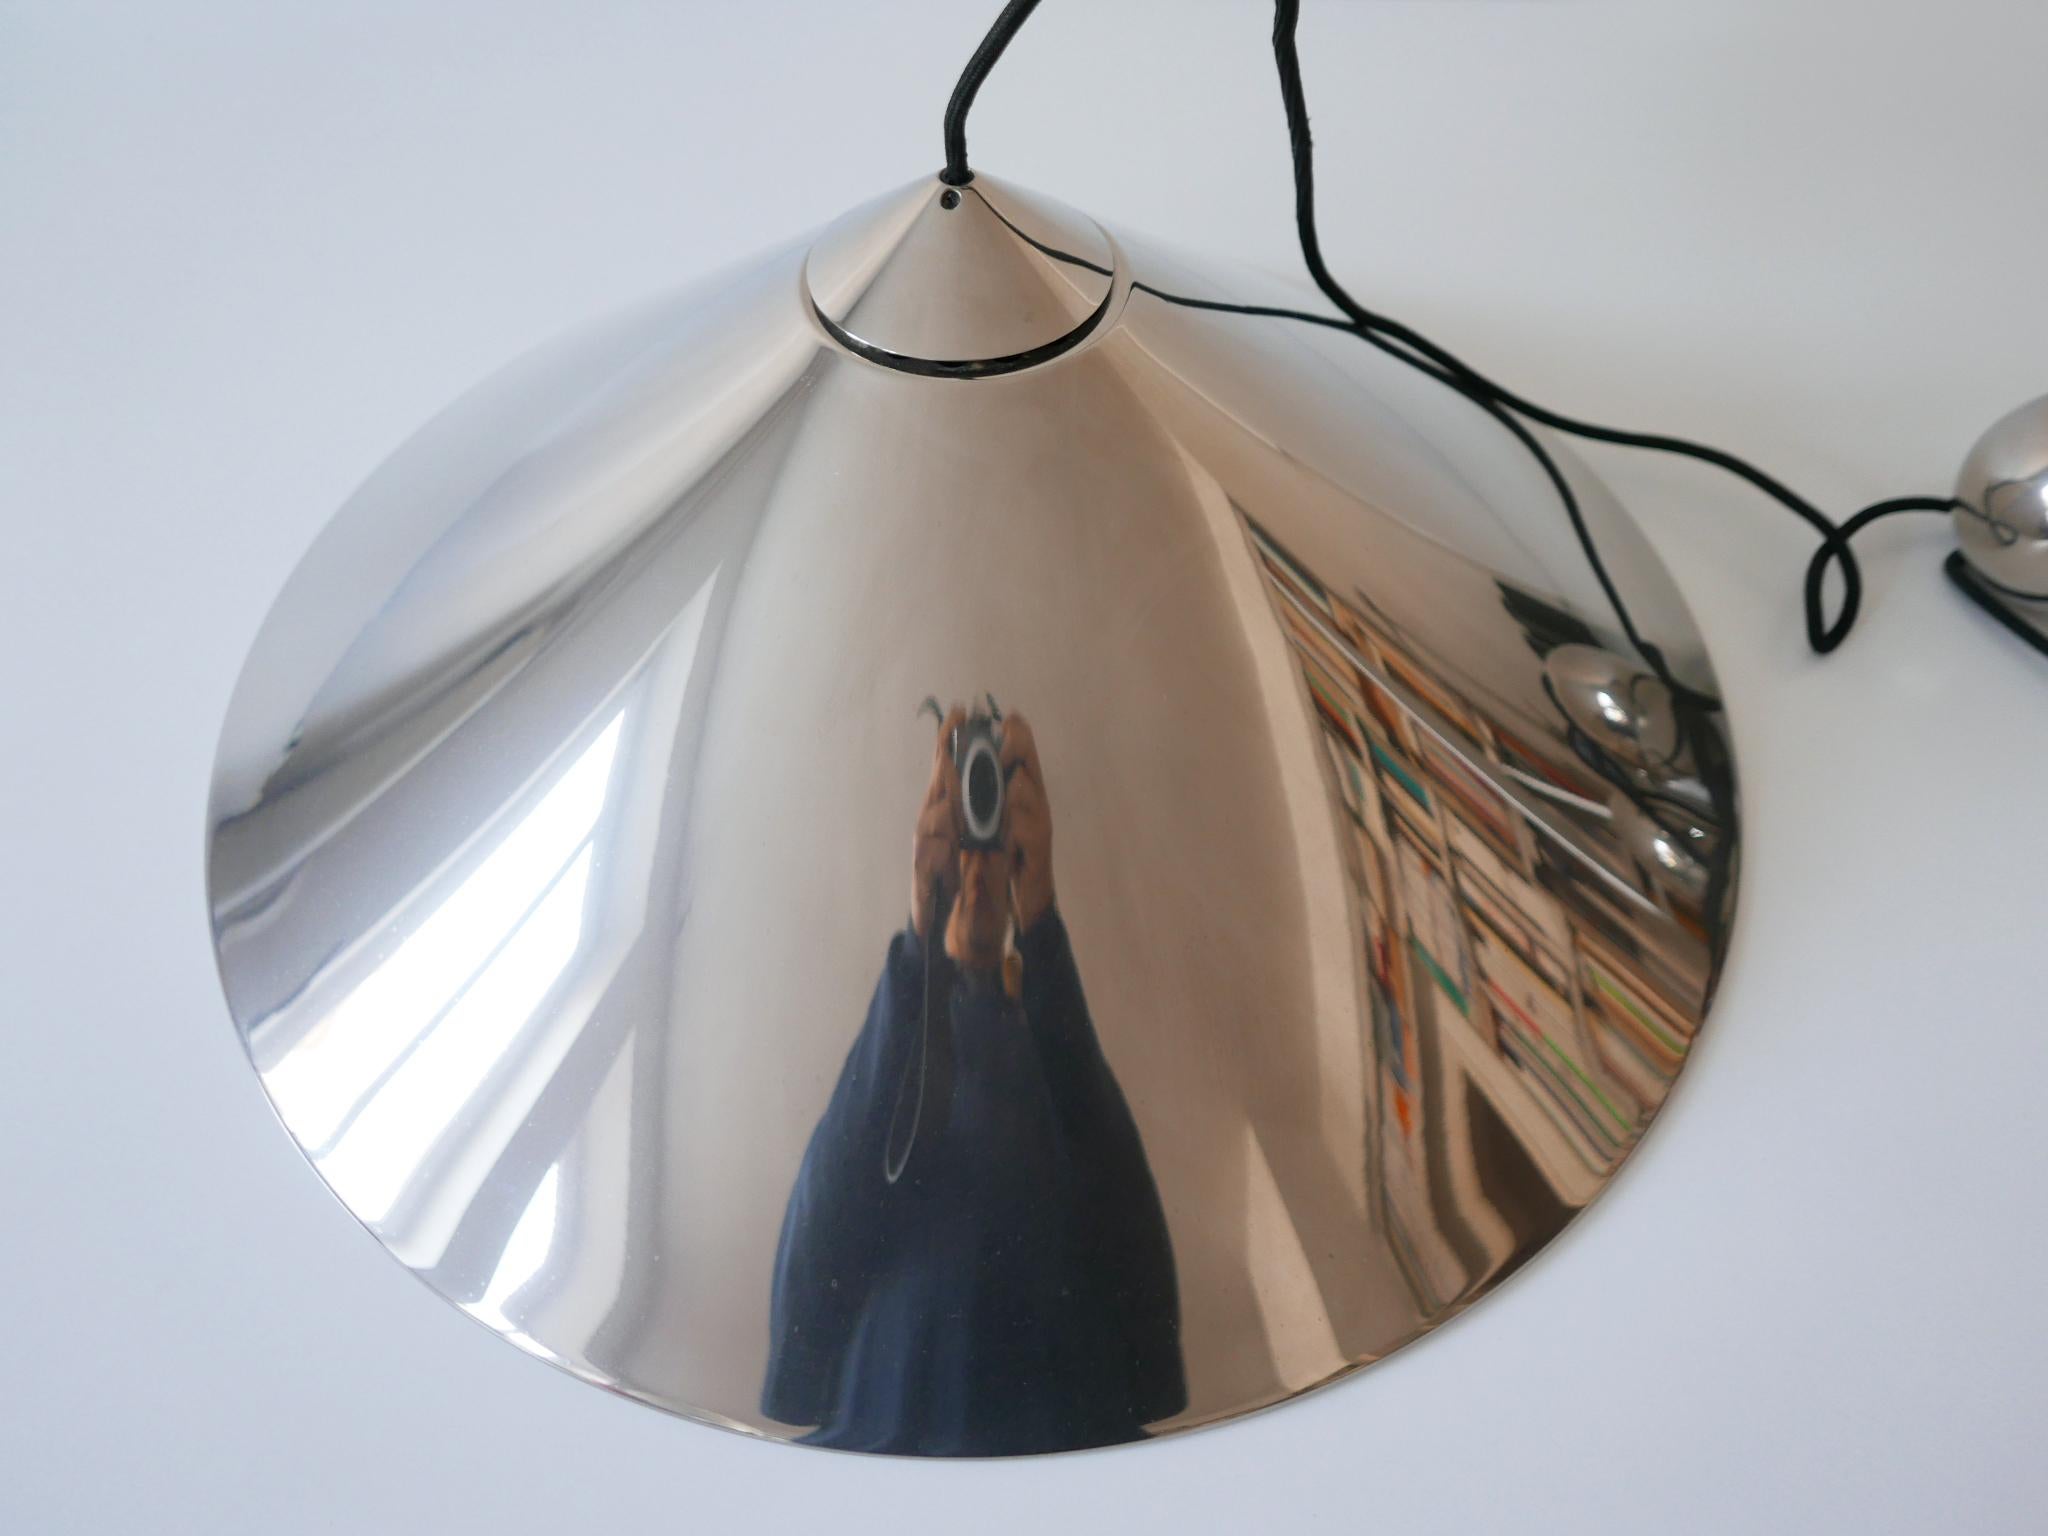 Adjustable Counterweight Pendant Lamp Keos by Florian Schulz Germany 1970s For Sale 9